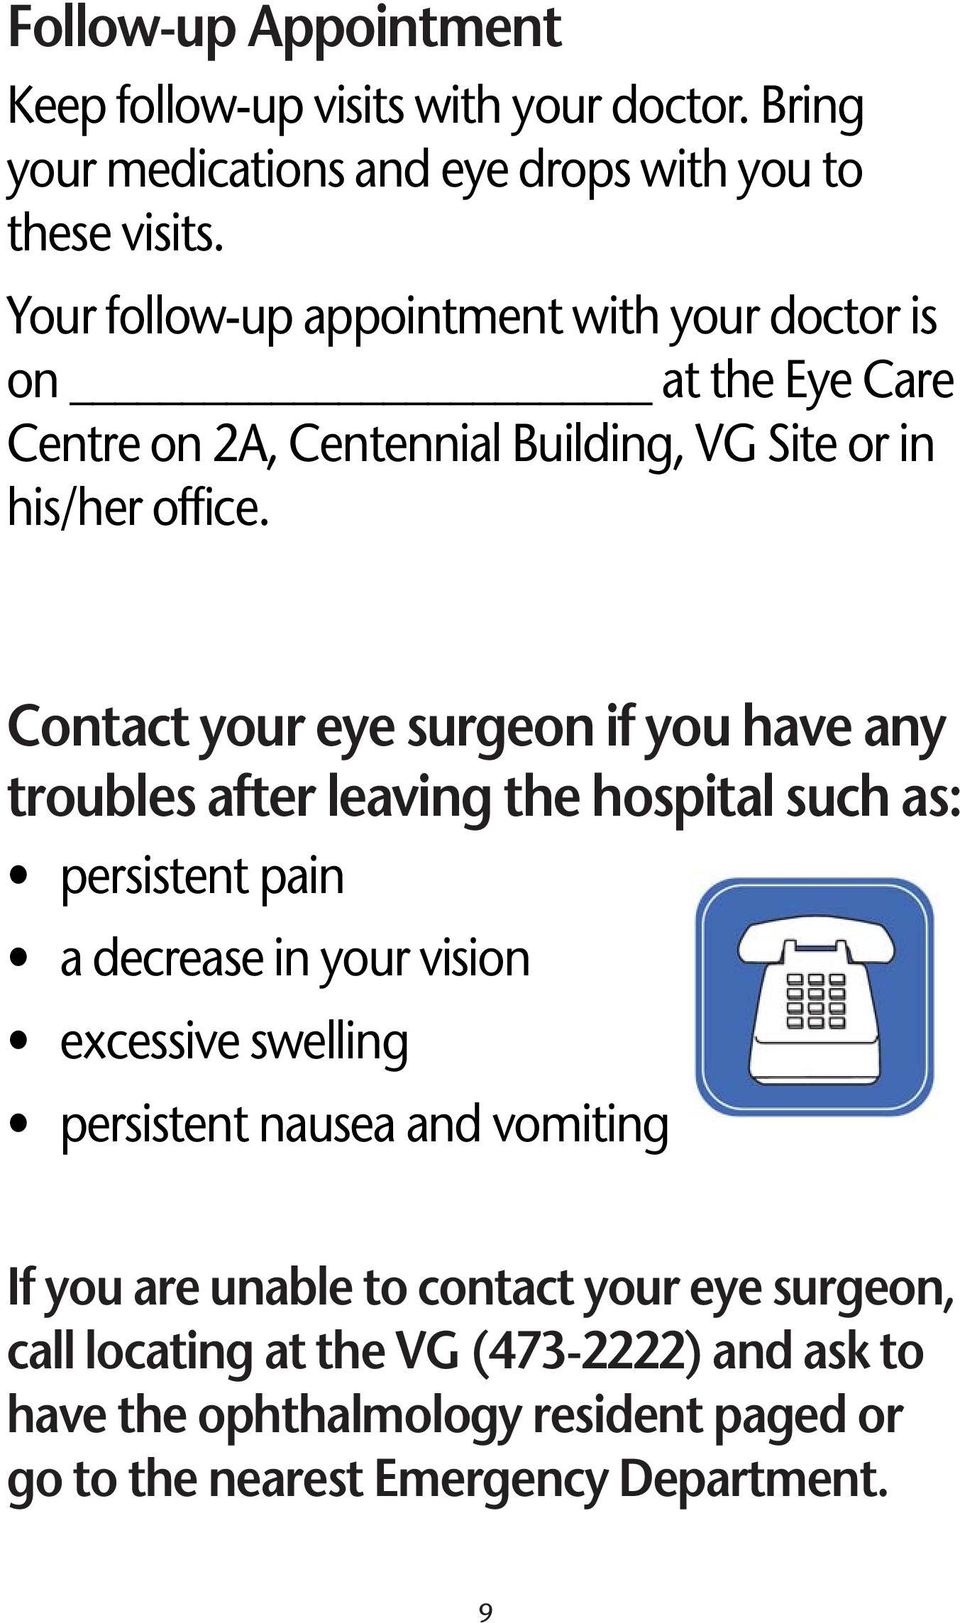 Contact your eye surgeon if you have any troubles after leaving the hospital such as: persistent pain a decrease in your vision excessive swelling